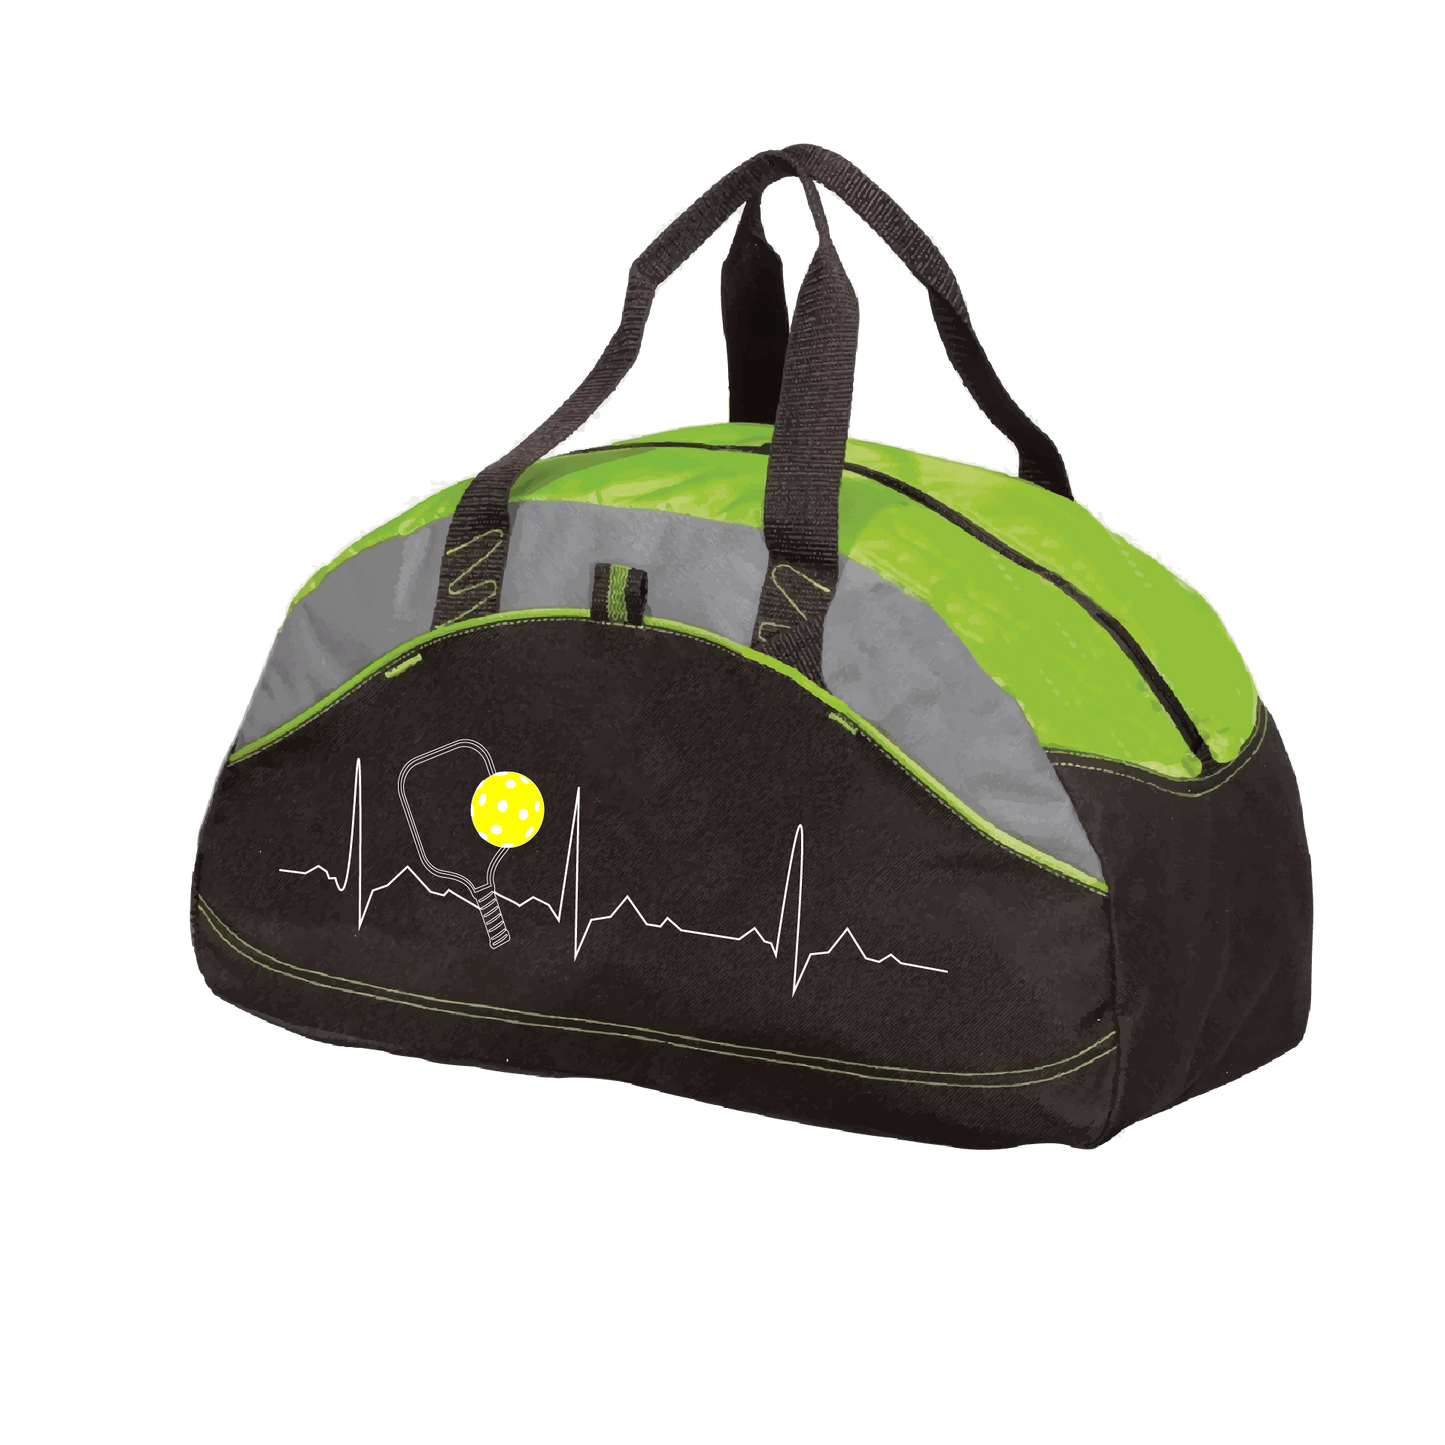 Pickleball Duffel Bag Design: Heartbeat  Carry your gear in comfort and style. This fun pickleball duffel bag is the perfect accessory for all pickleball players needing to keep their gear in one place. This medium sized duffel tote is ideal for all your pickleball activities. The large center compartment allows for plenty of space and the mesh end pocket is perfect for holding a water bottle. 